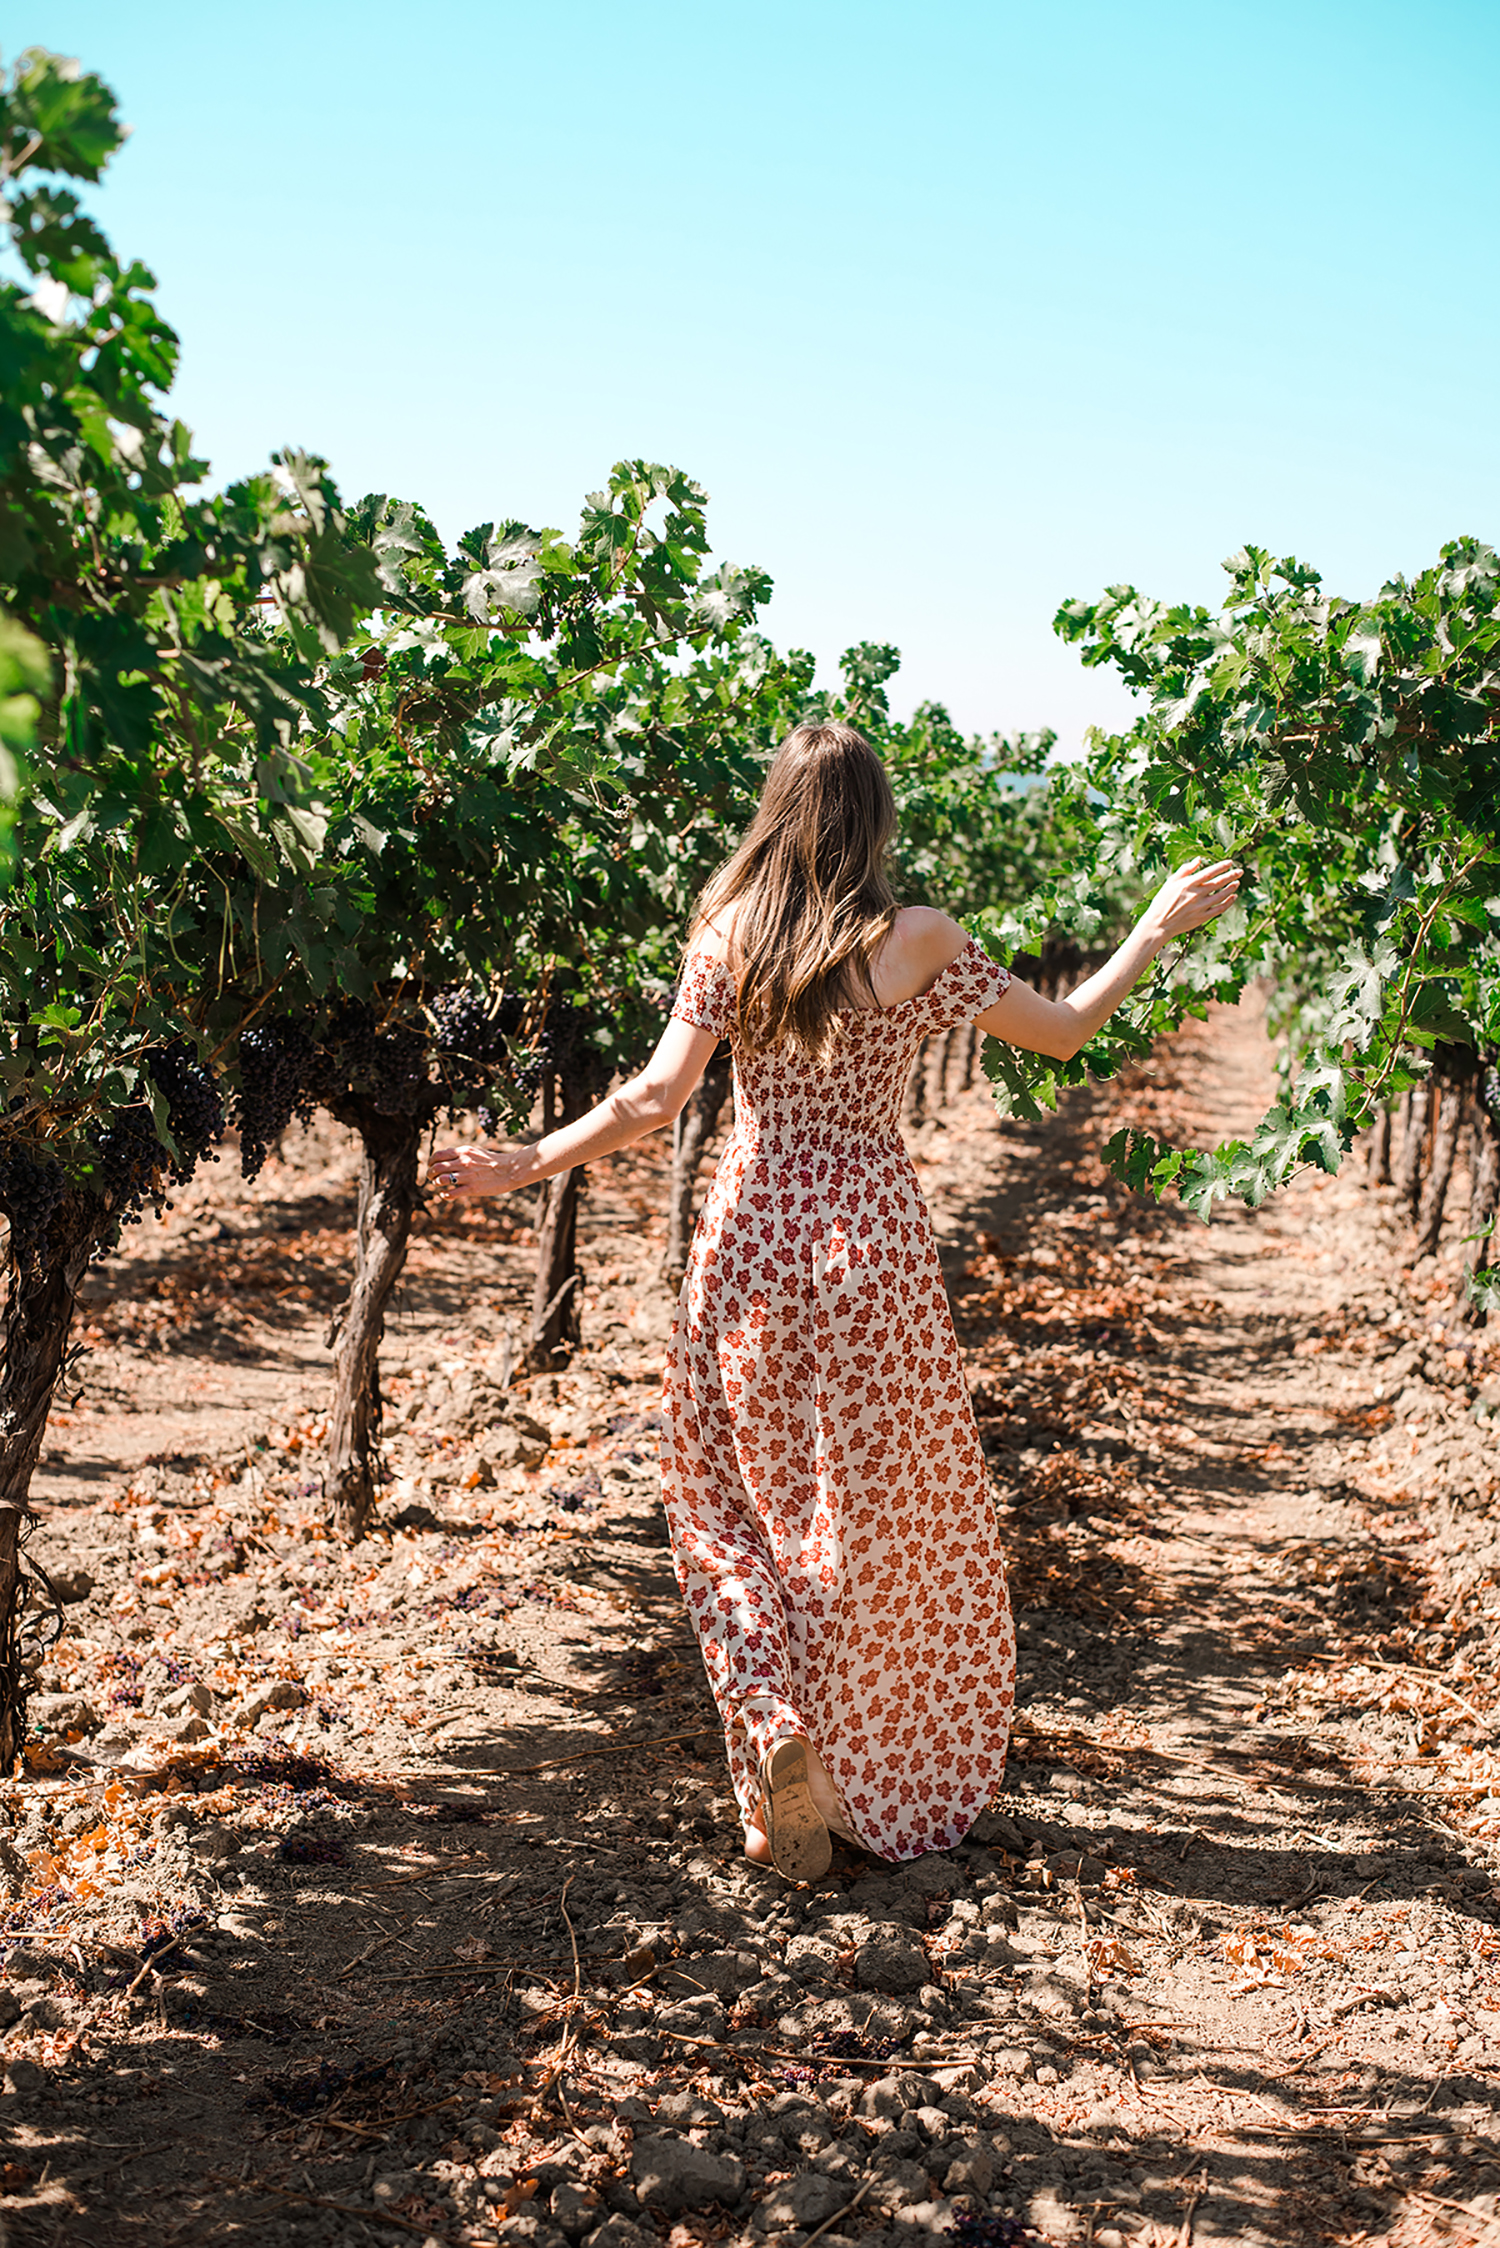 Alyssa Campanella of The A List shares her favorite travels from 2017 in Napa Valley, California